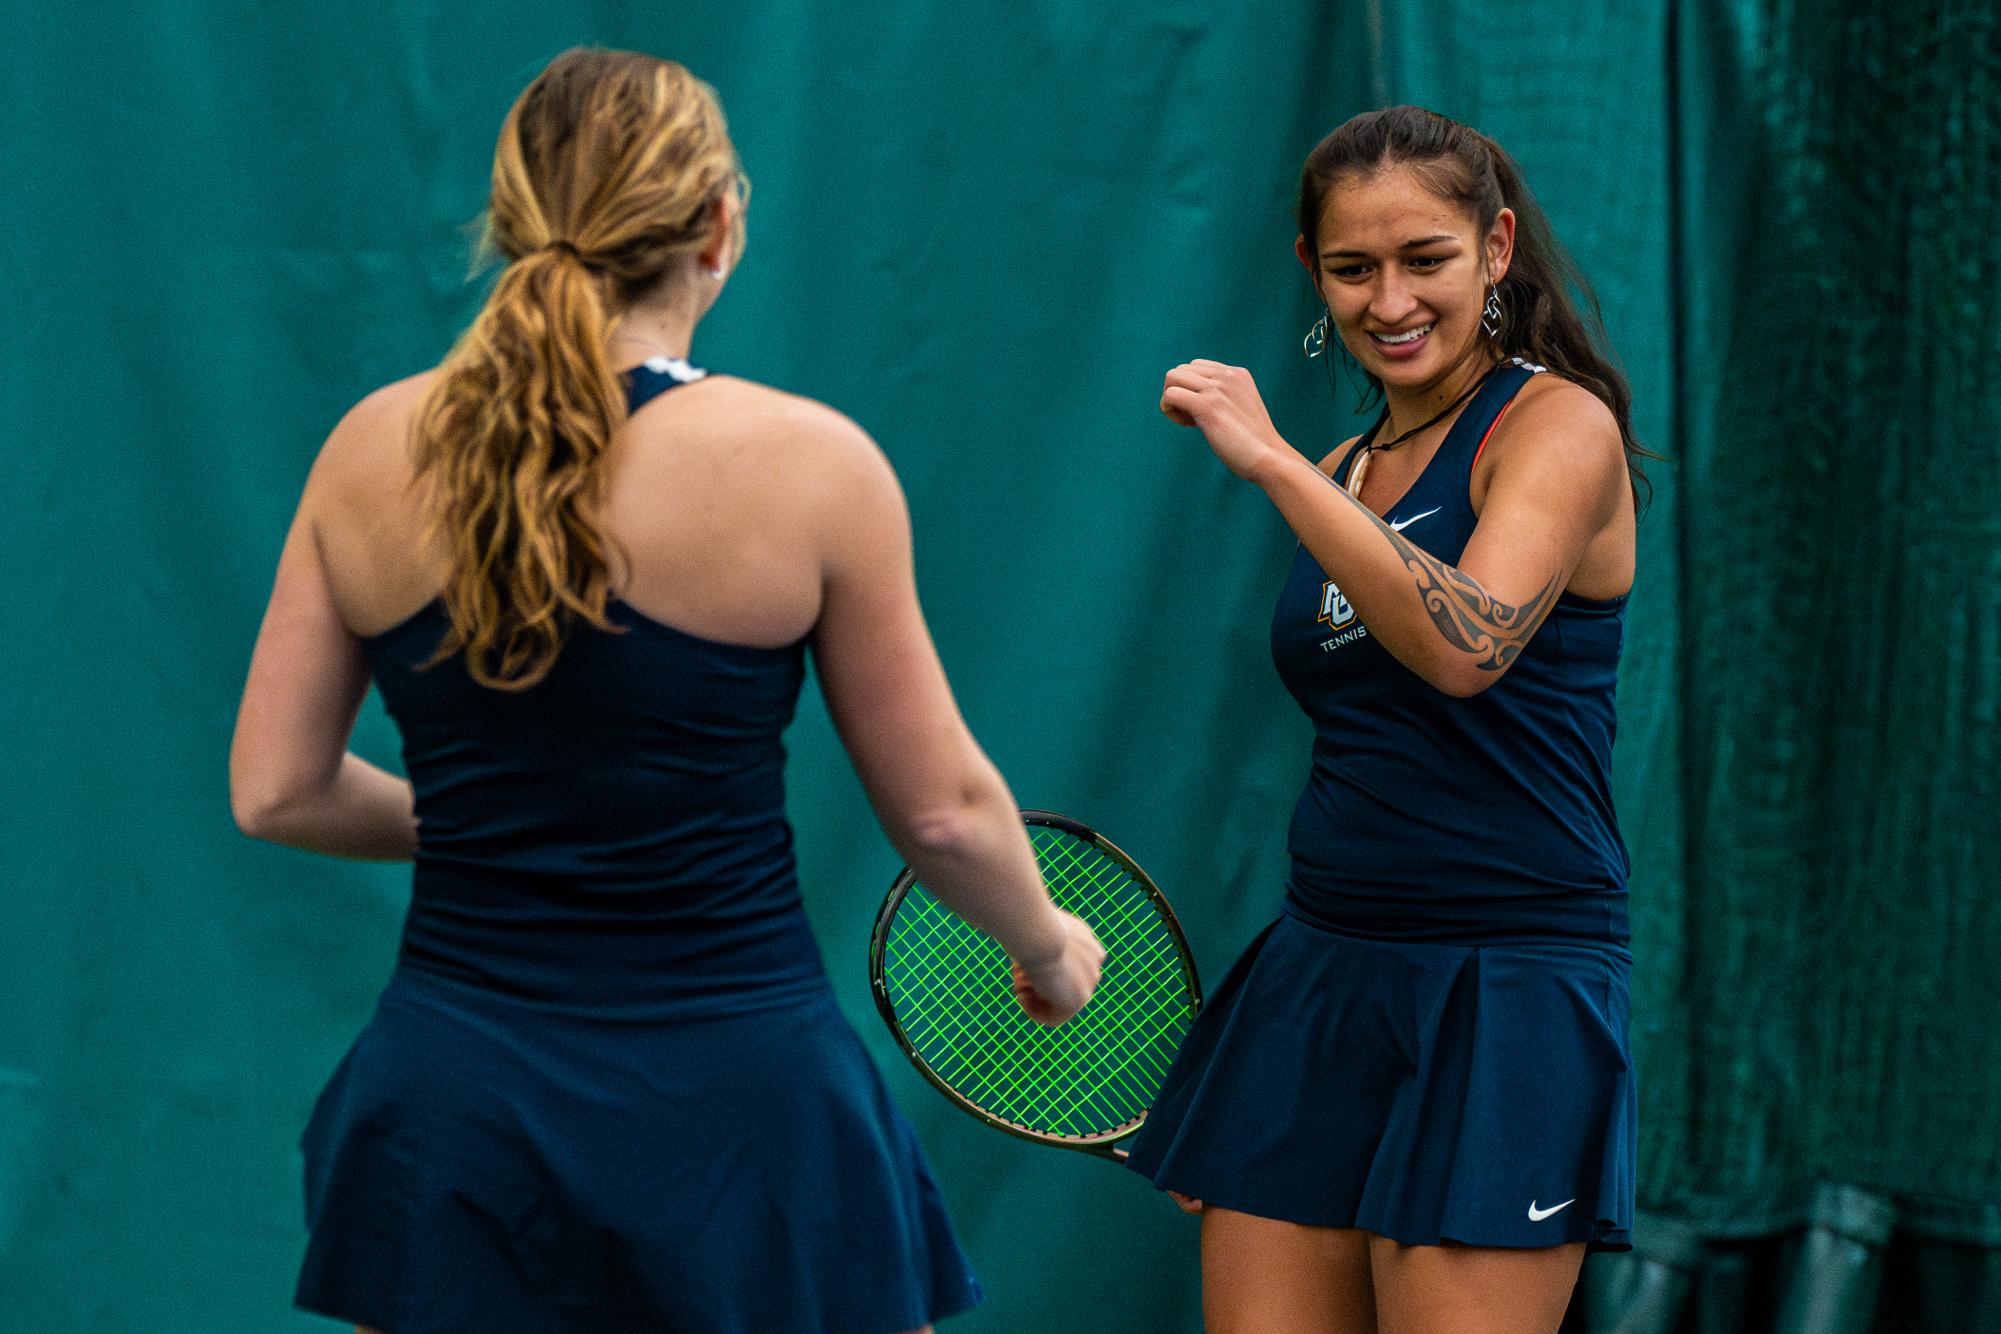 Marquette Tennis Star Tiana Windbuchler Shines with Confidence in Last Season